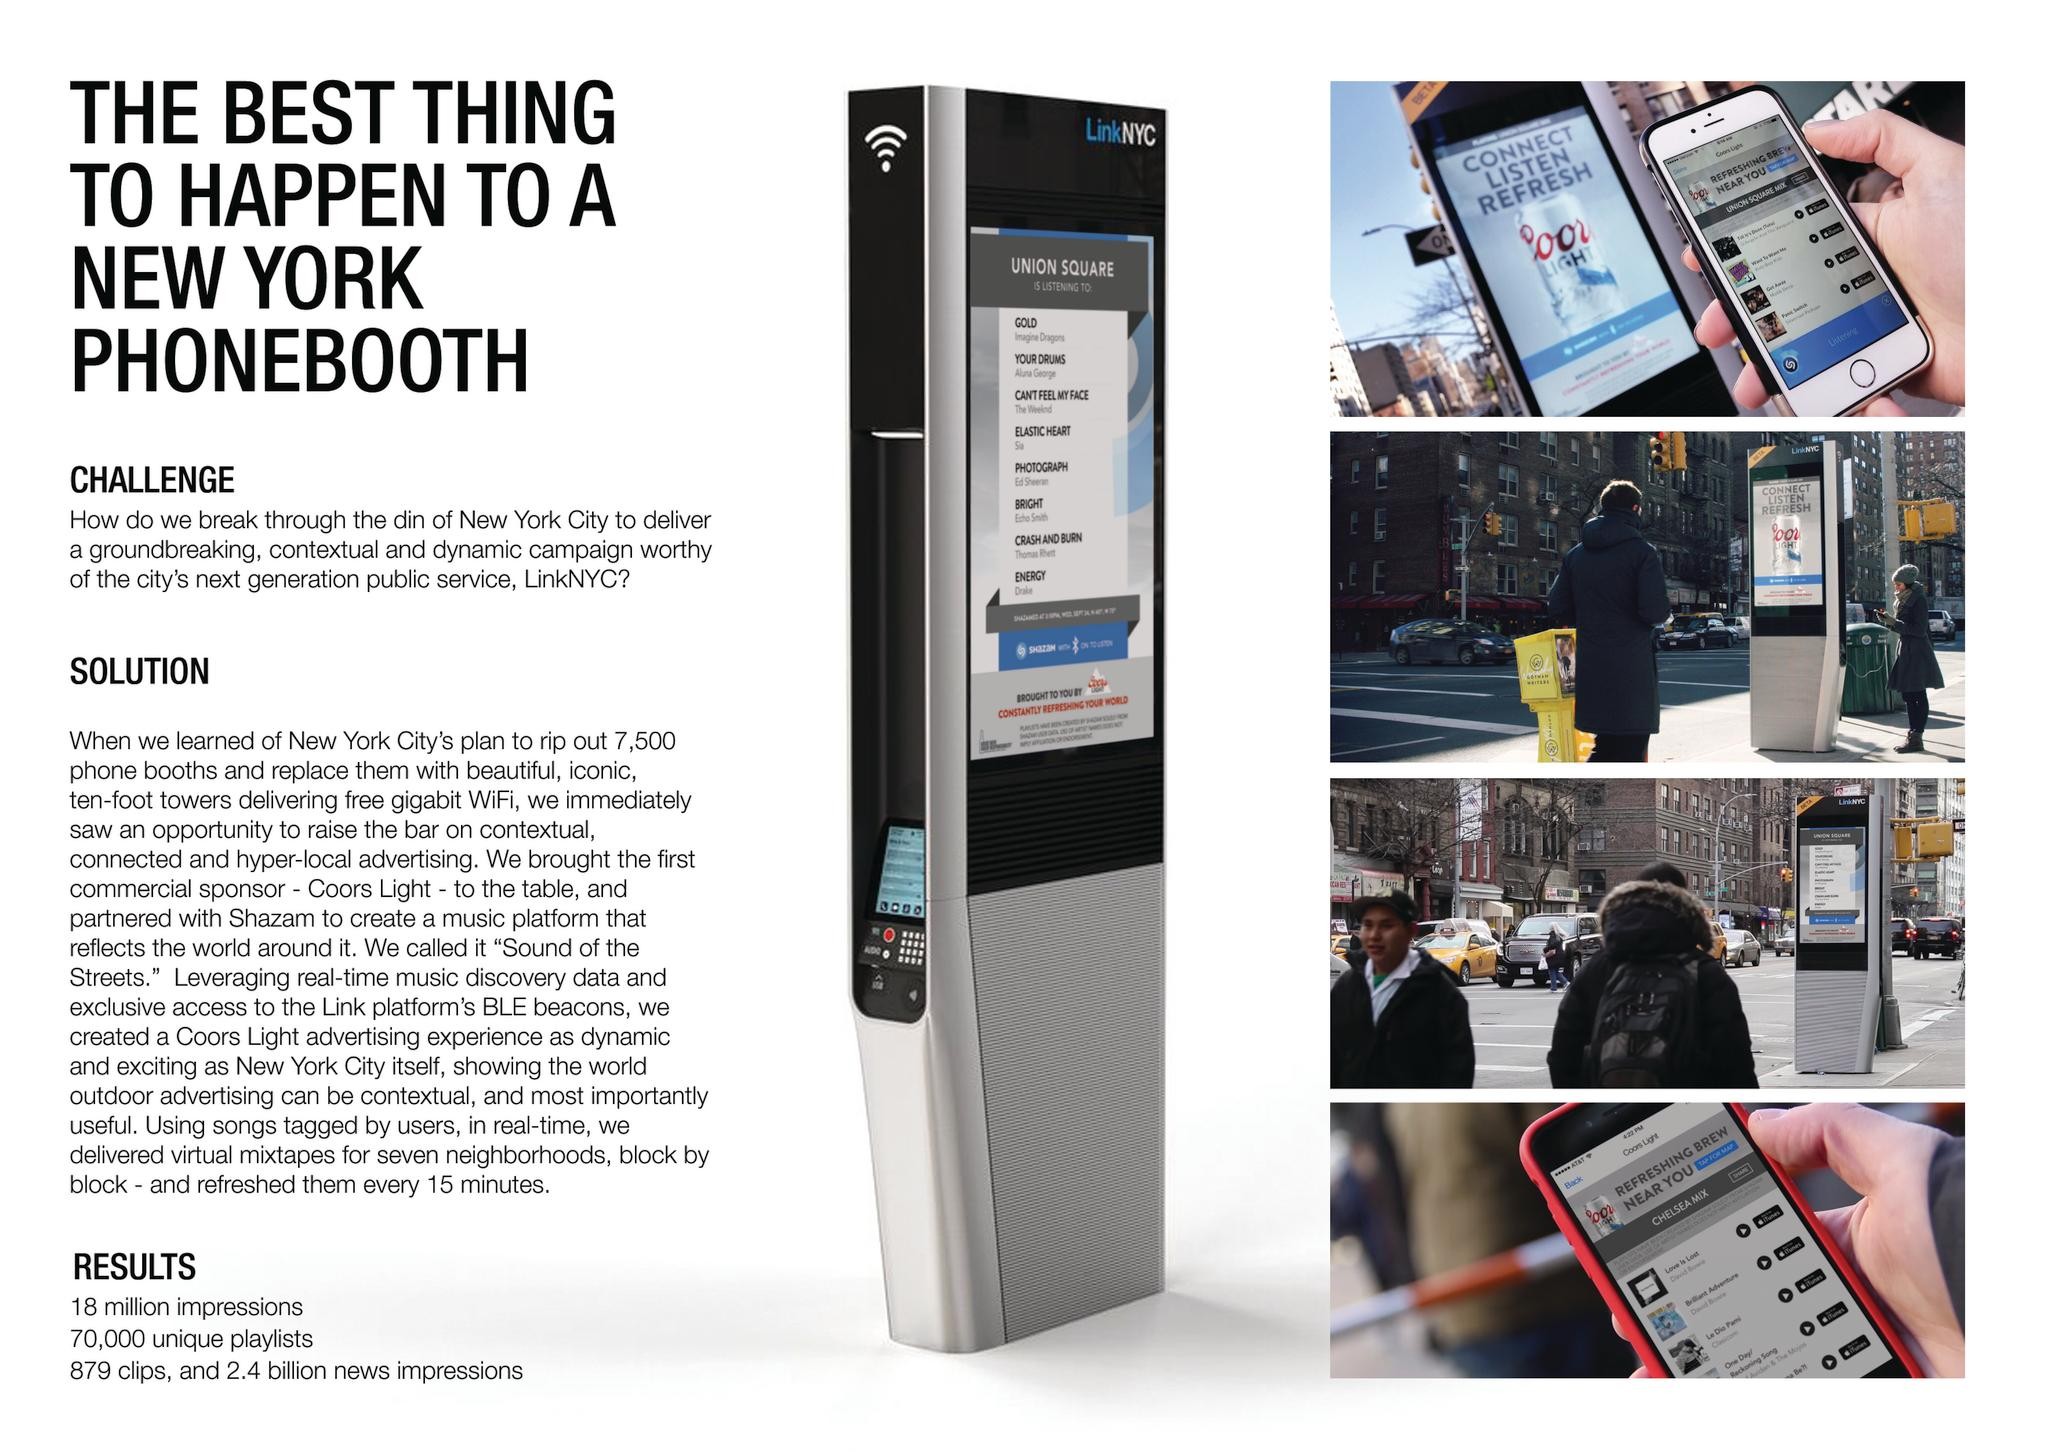 The Best Thing to Happen to a New York Phonebooth